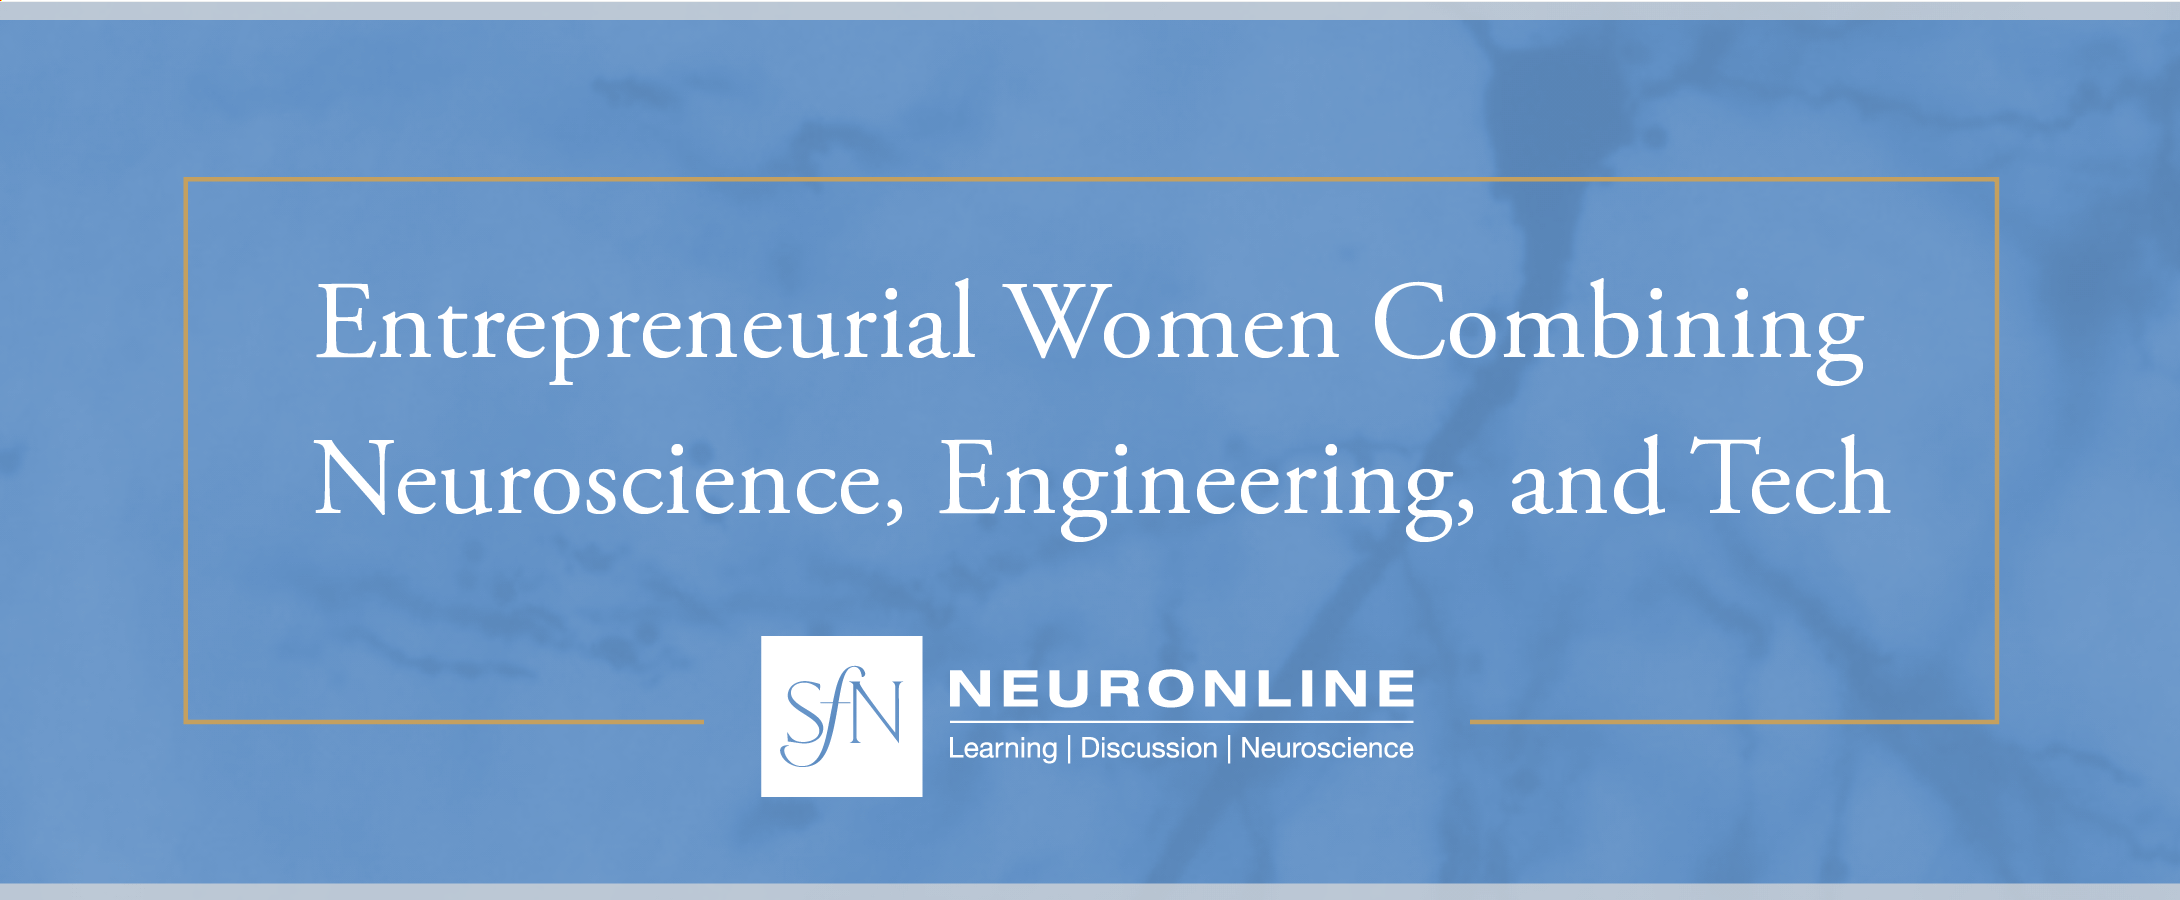 Title card stating 'Entrepreneurial Women Combining Neuroscience, Engineering, and Technology' in white text on a blue background, with the Neuronline logo below.